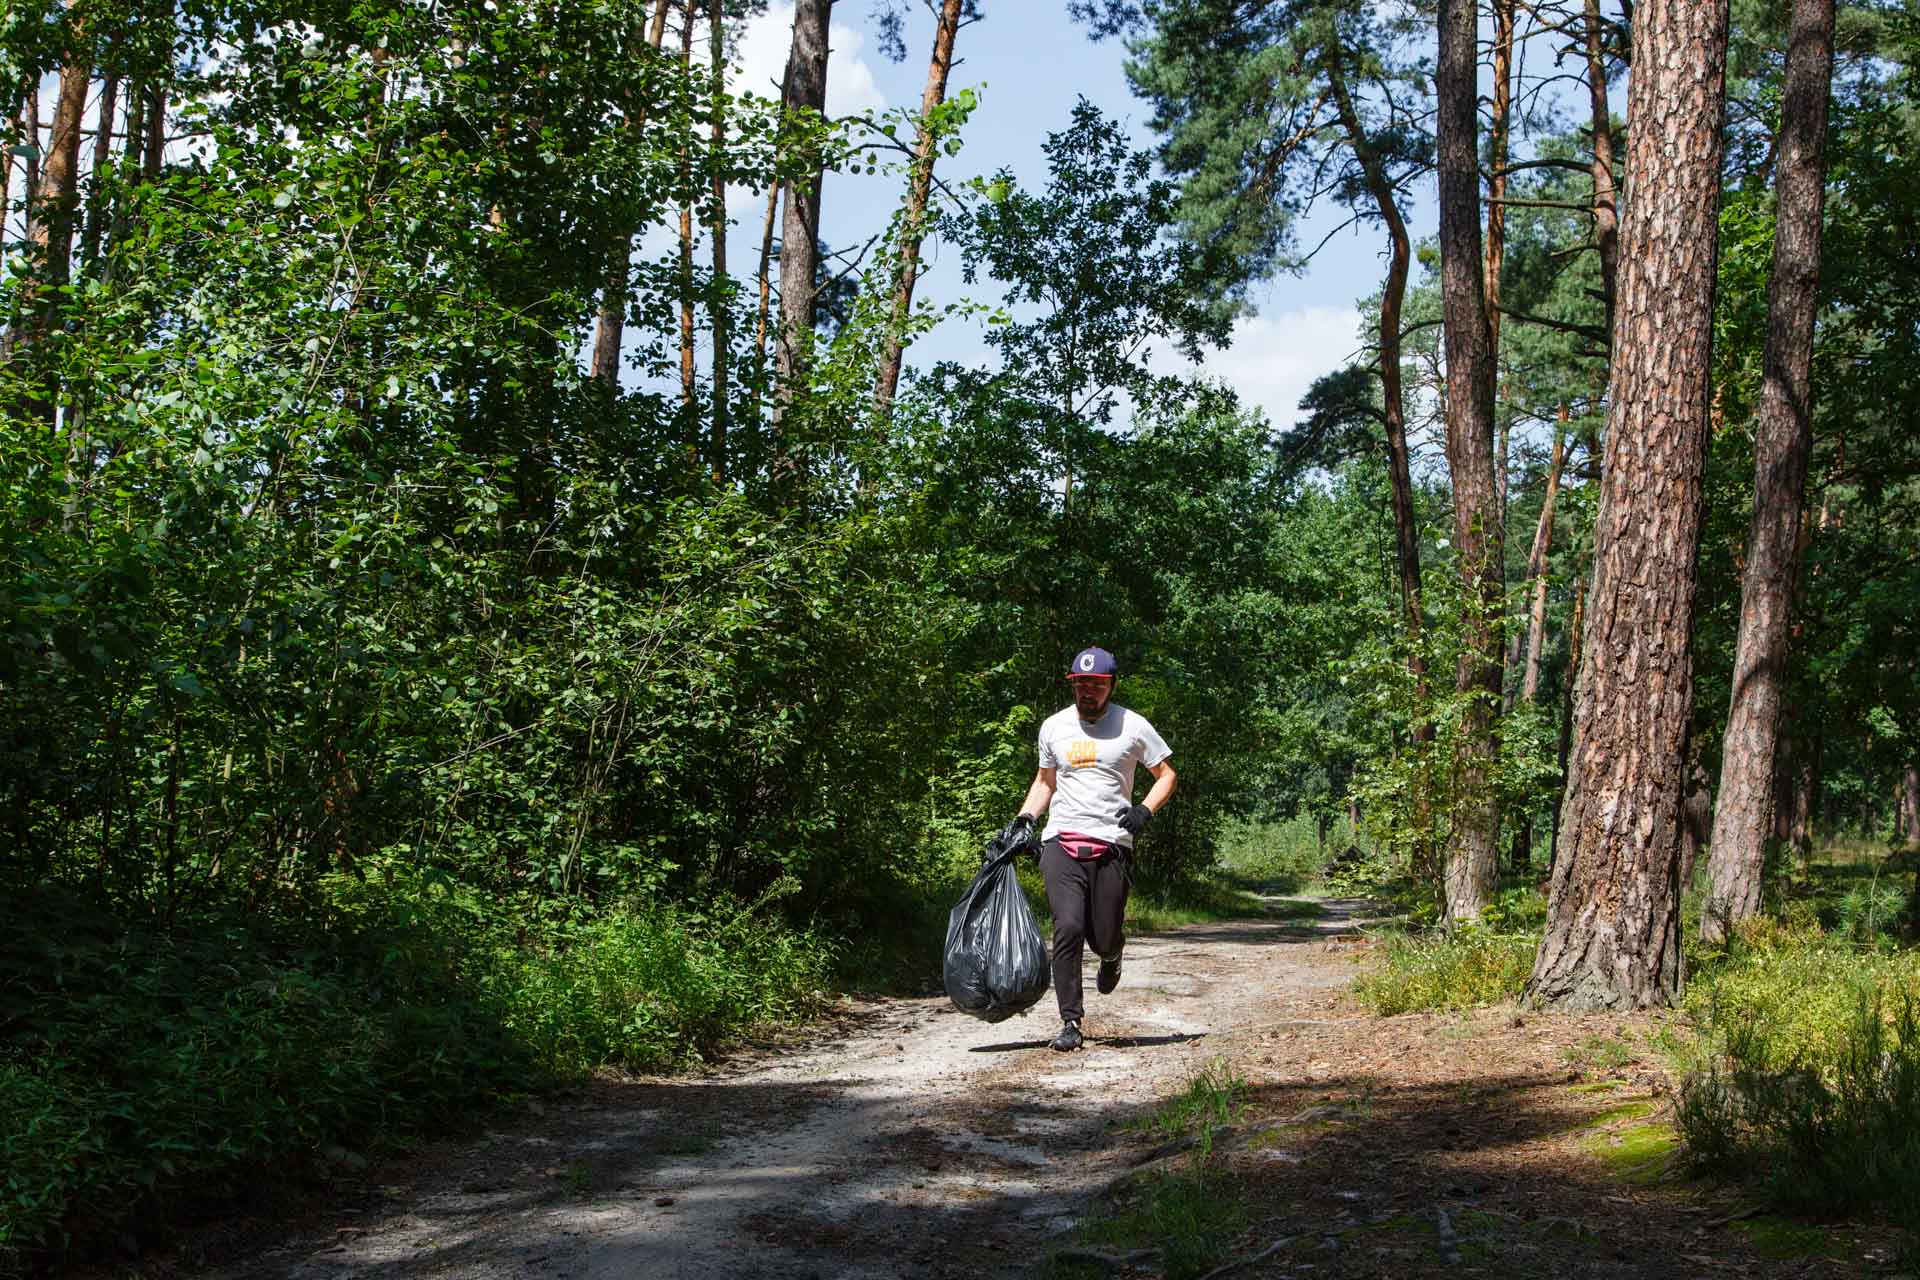 Plogging, the art of picking up litter while jogging, spreads in Ukraine